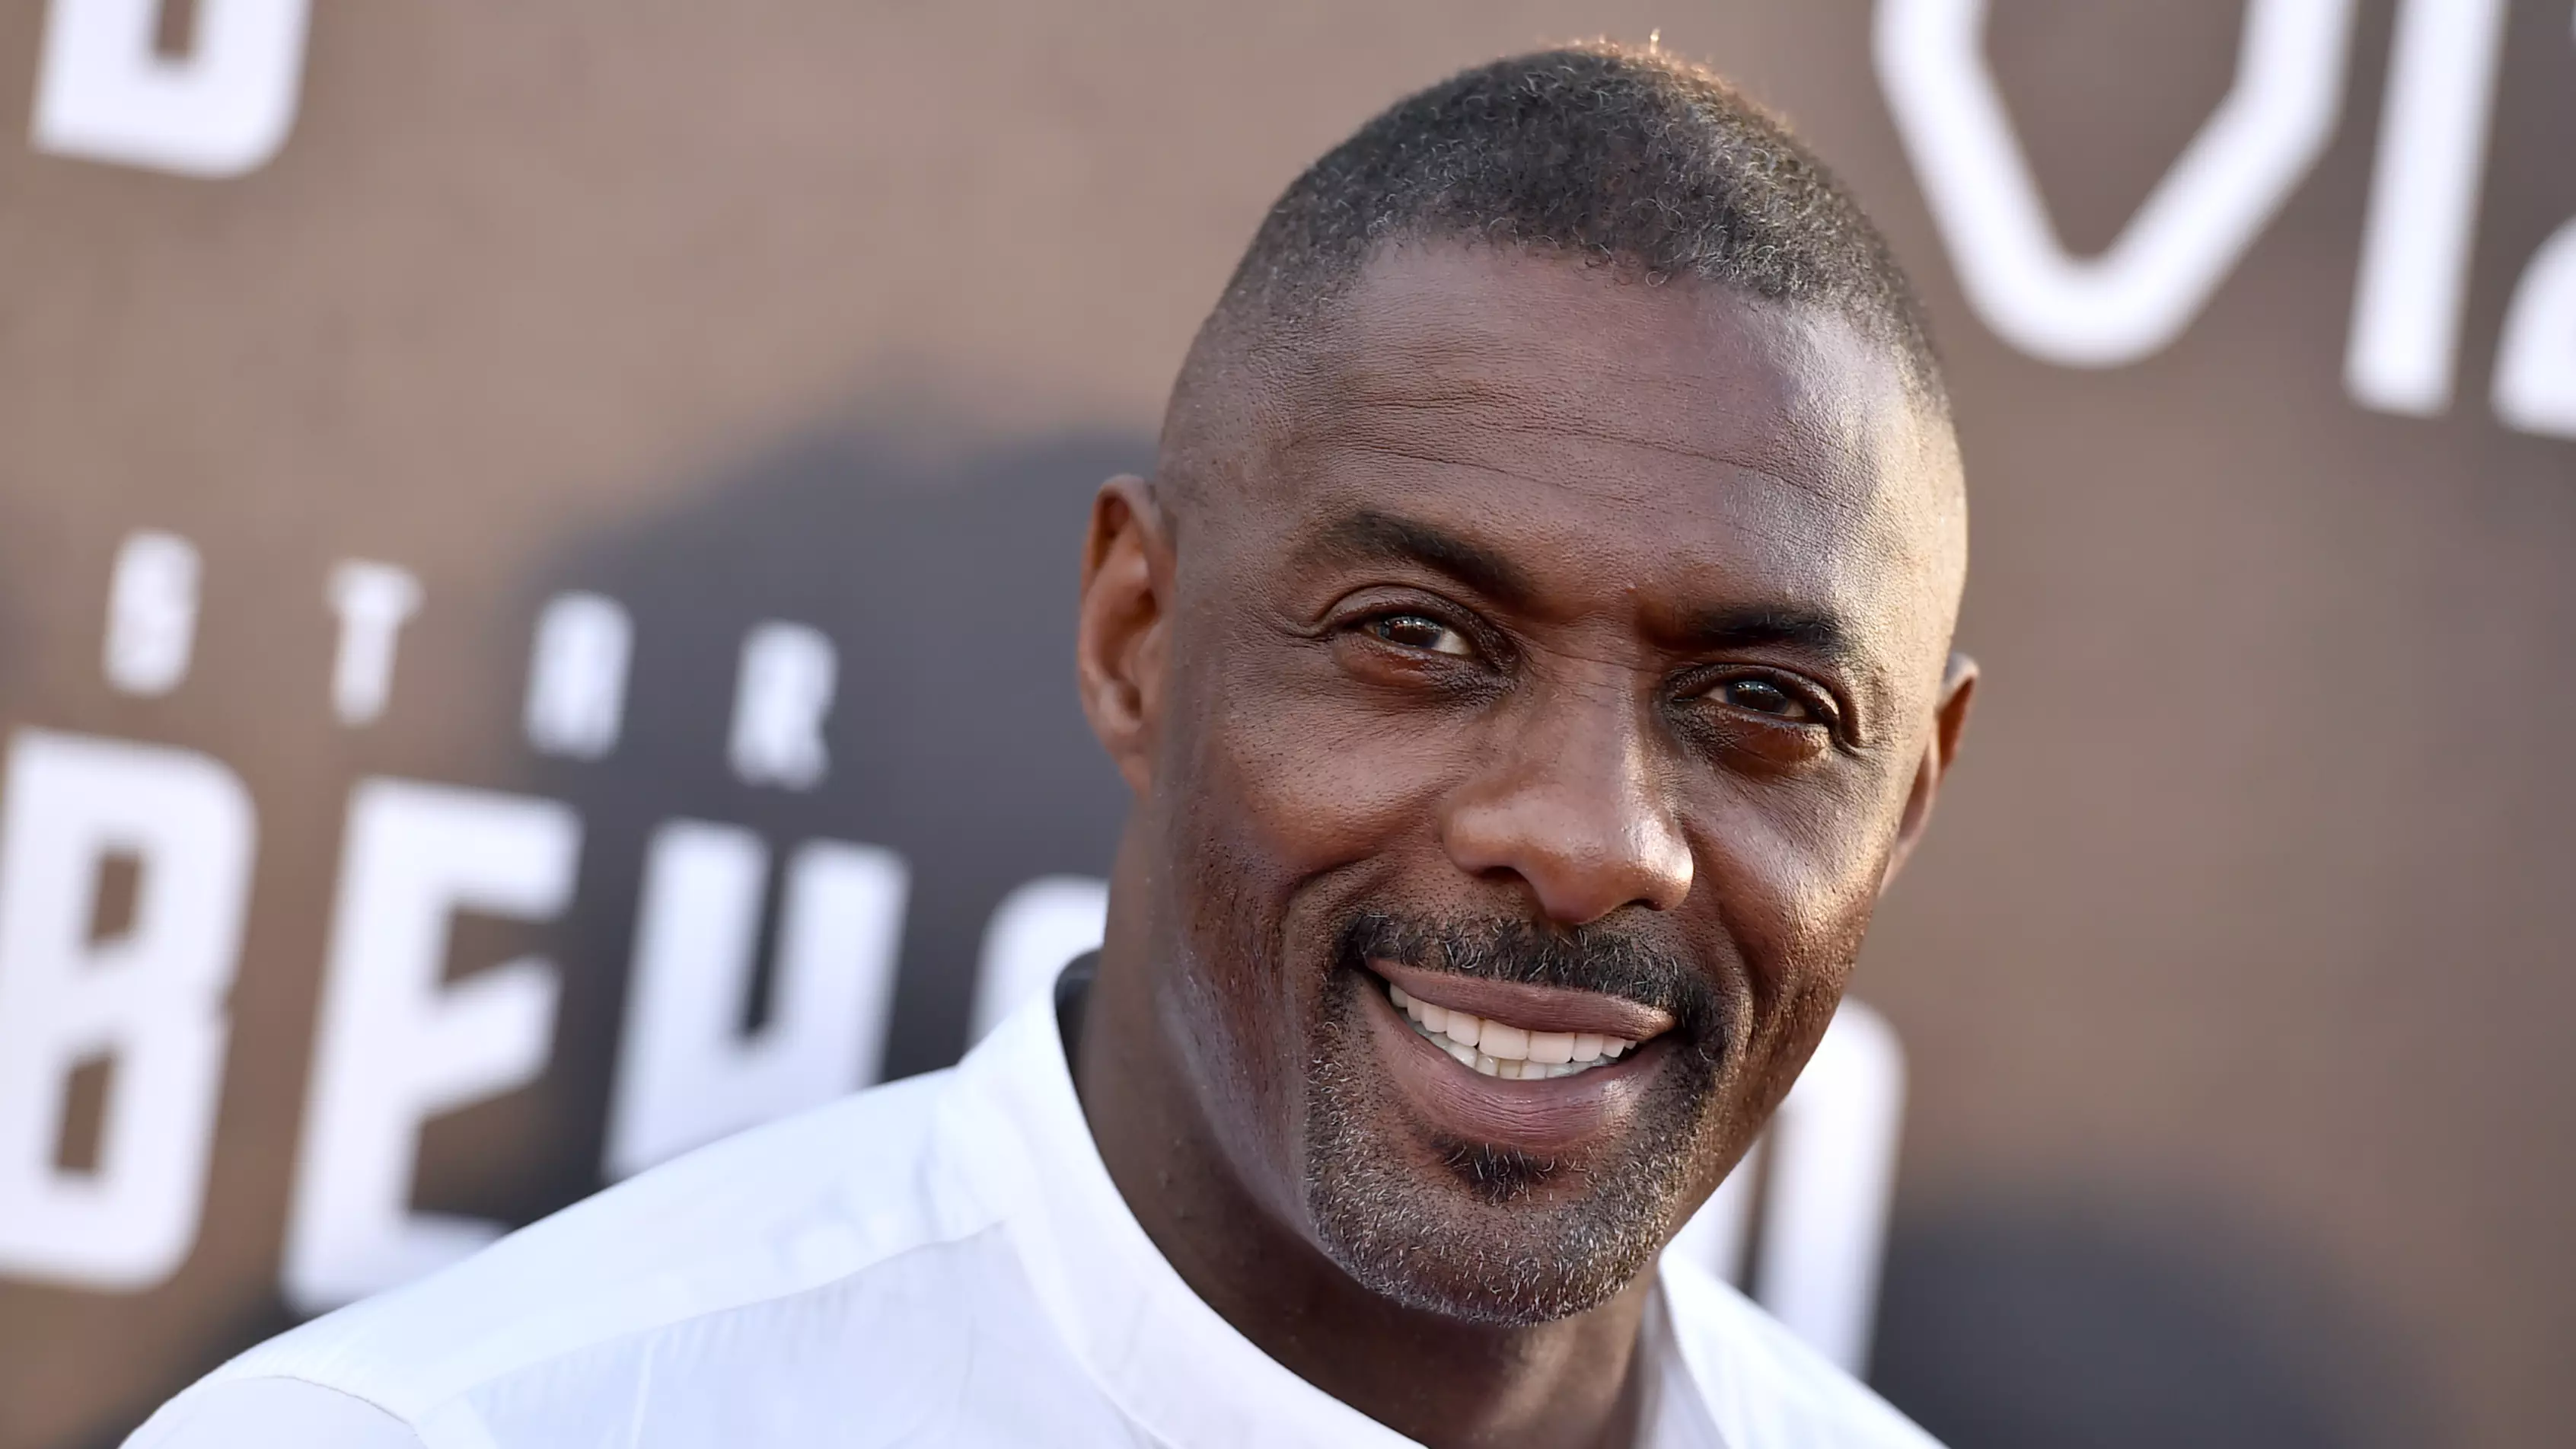 Idris Elba Has Spent Thousands On Giving Young Kids Gym Memberships To Get Them Off The Streets